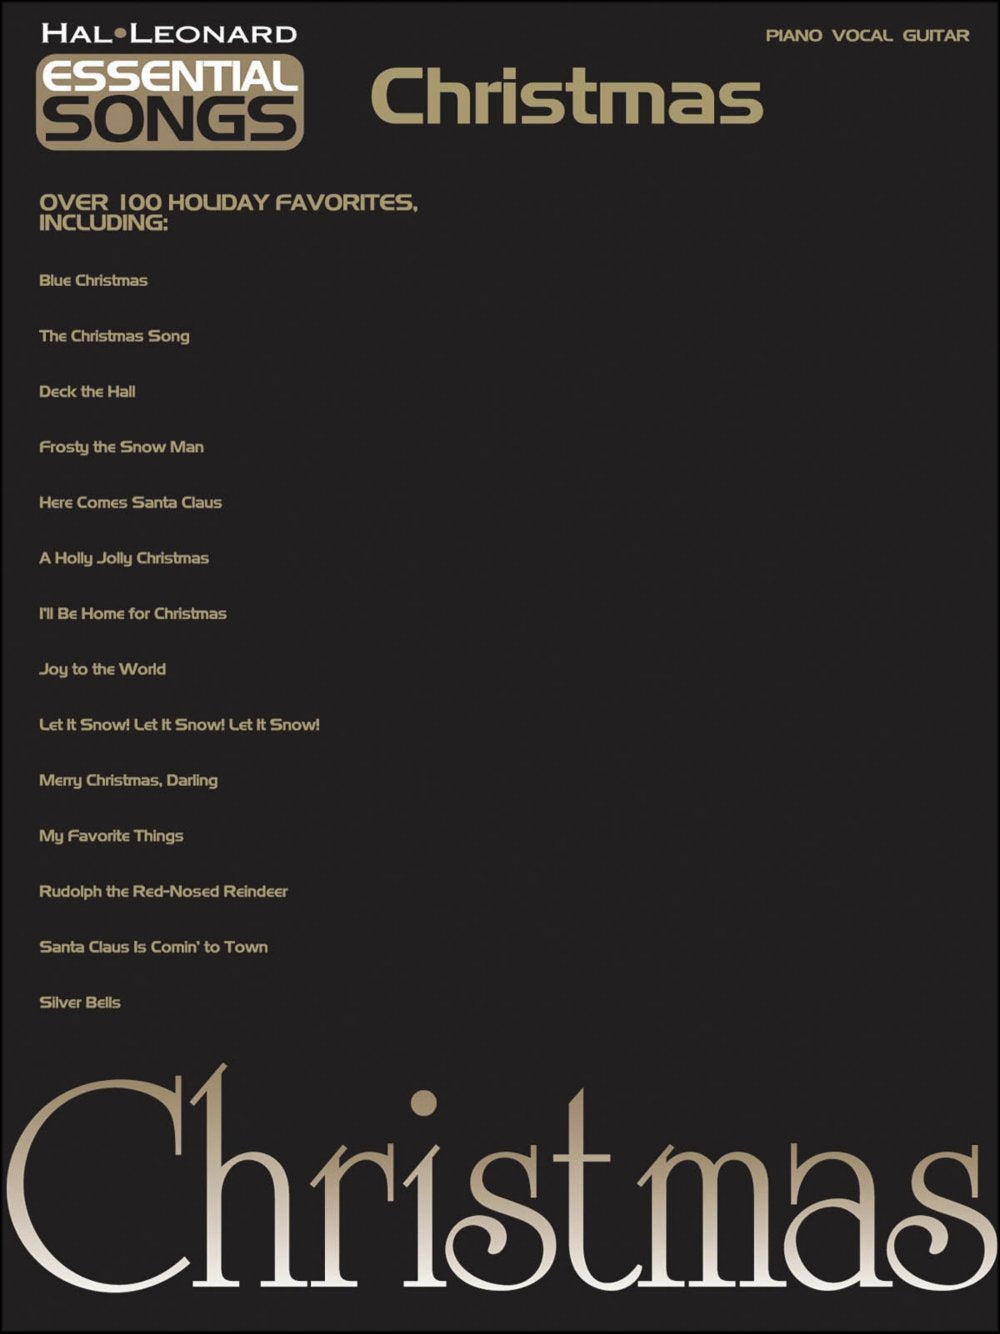 Hal Leonard Essential Songs Christmas arranged for piano, vocal, and guitar